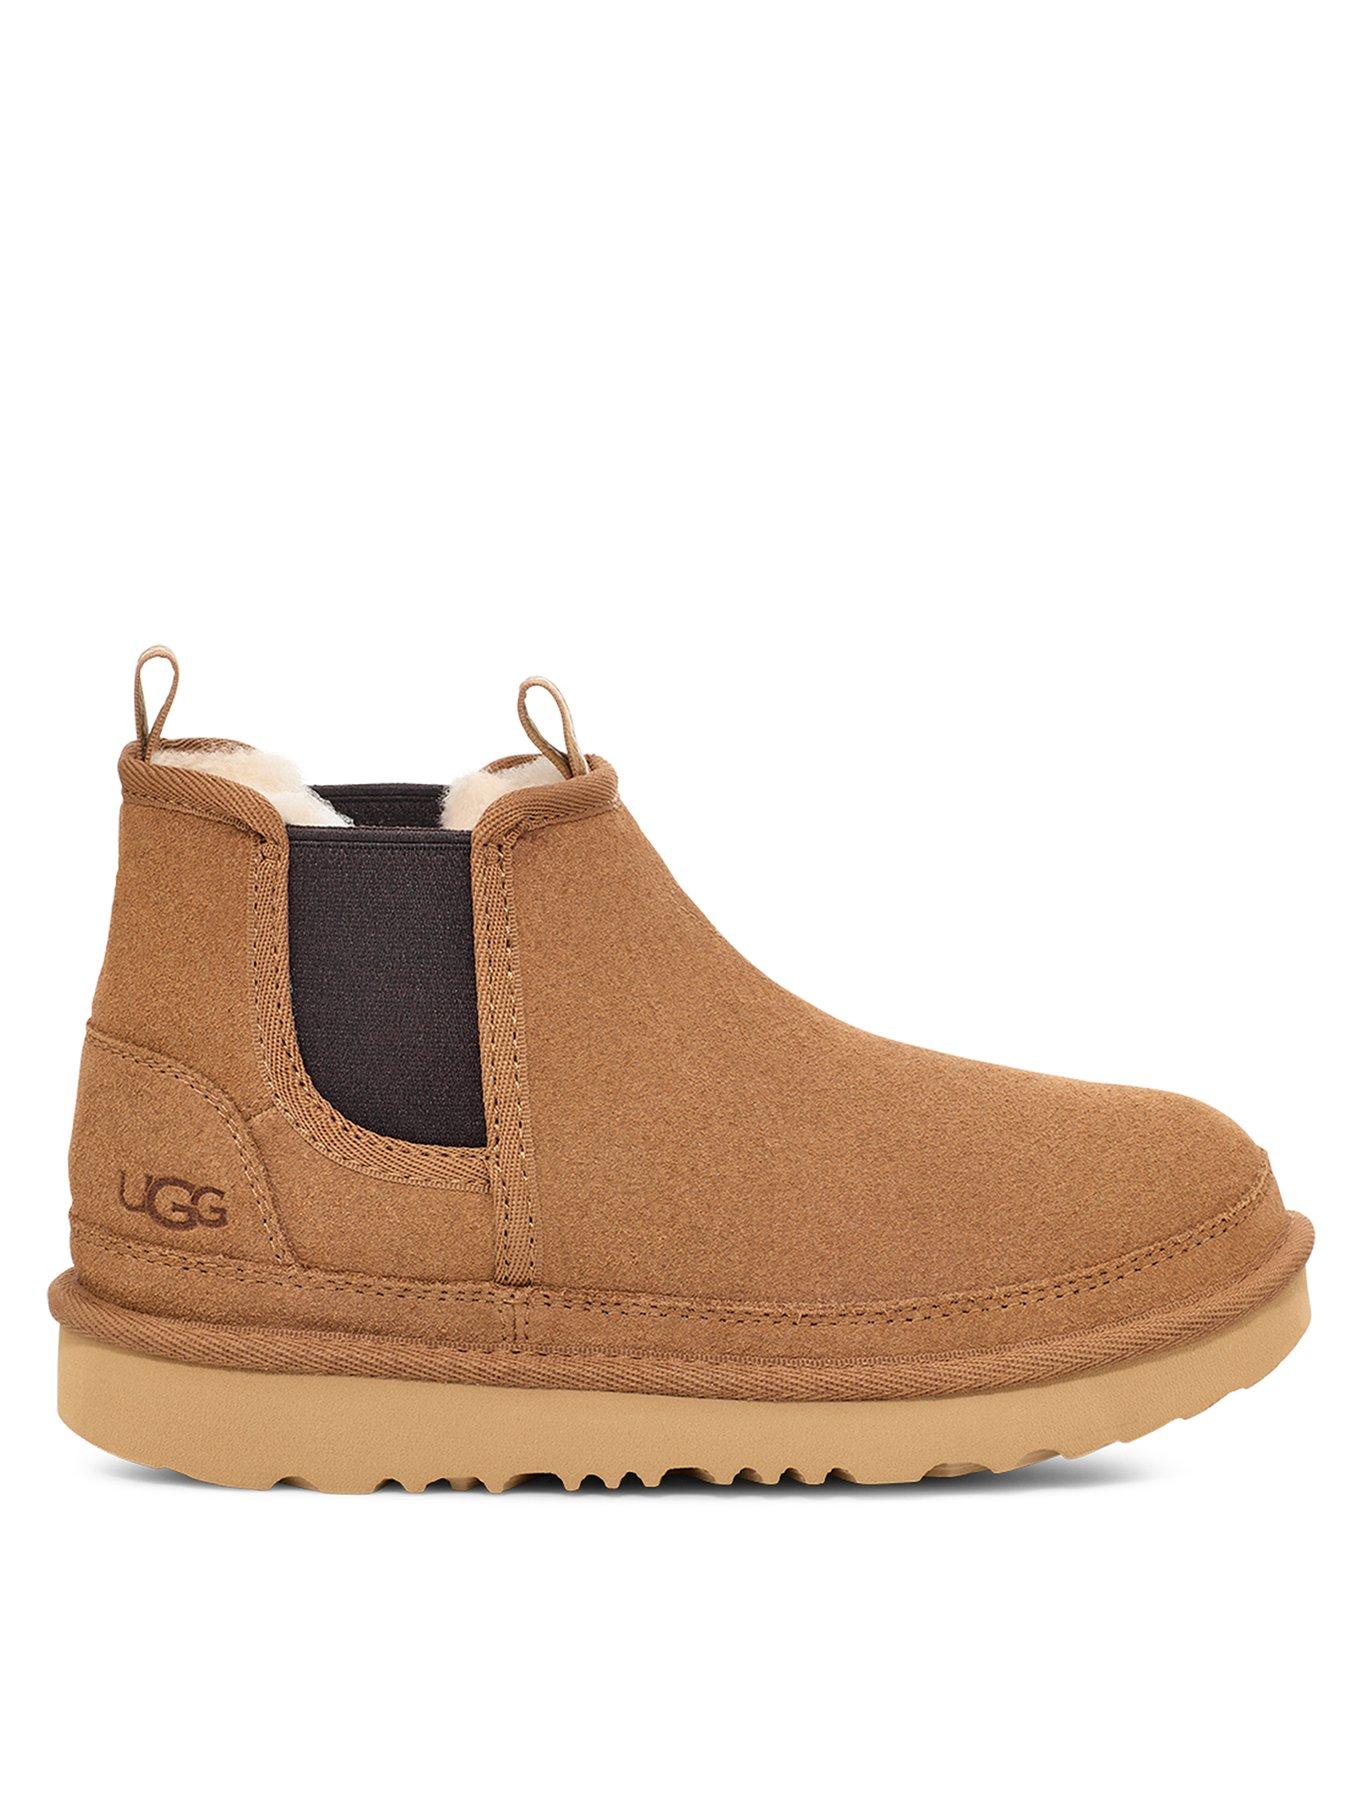 UGG Kids Neumel Chelsea Classic Boot - Brown | Very.co.uk